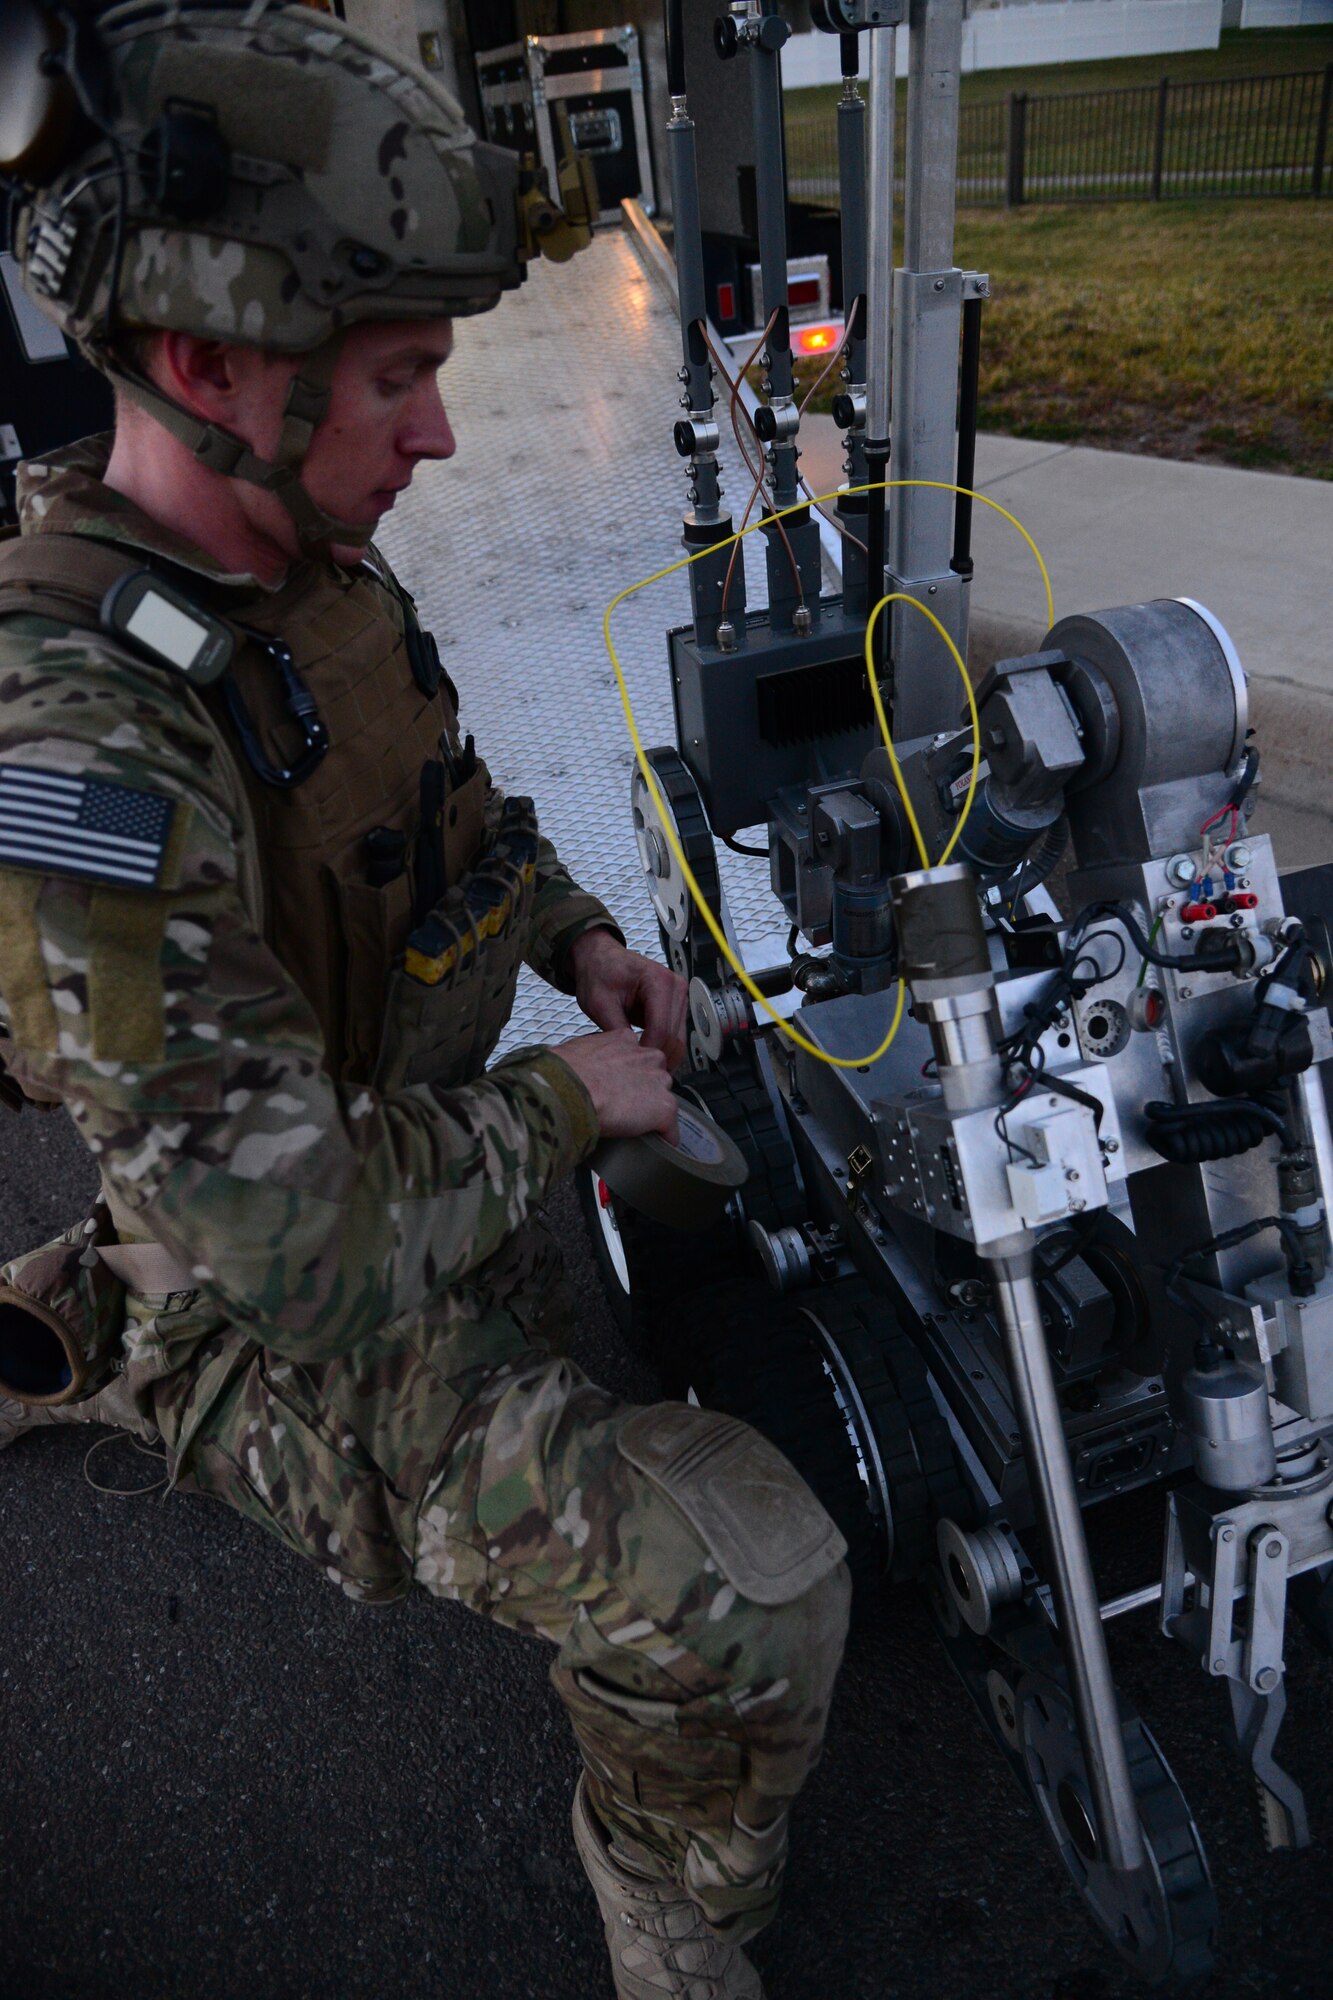 An Airman with the 341st Explosive Ordinance Disposal works on a robot, Nov. 8, 2015, at Malmstrom Air Force Base, Mont. The 341st EOD is part of U.S. Strategic Command’s (USSTRATCOM) Task Force 214 and supports the command’s strategic deterrence mission by operating and maintaining the Air Force’s Intercontinental Ballistic Missile force. GLOBAL THUNDER is an annual U.S. Strategic Command training event that assesses command and control functionality in all USSTRATCOM mission areas and affords component commands a venue to evaluate their joint operational readiness. Planning for GLOBAL THUNDER 16 has been under way for more than a year and is based on a notional scenario with fictitious adversaries. USSTRATCOM, one of nine DoD unified combatant commands, relies on various task forces for the execution of its global missions, which also include space operations; cyberspace operations; joint electronic warfare; global strike; missile defense; intelligence, surveillance and reconnaissance; combating weapons of mass destruction; and analysis and targeting. (U.S. Air Force photo by Airman 1st Class Magen M. Reeves)